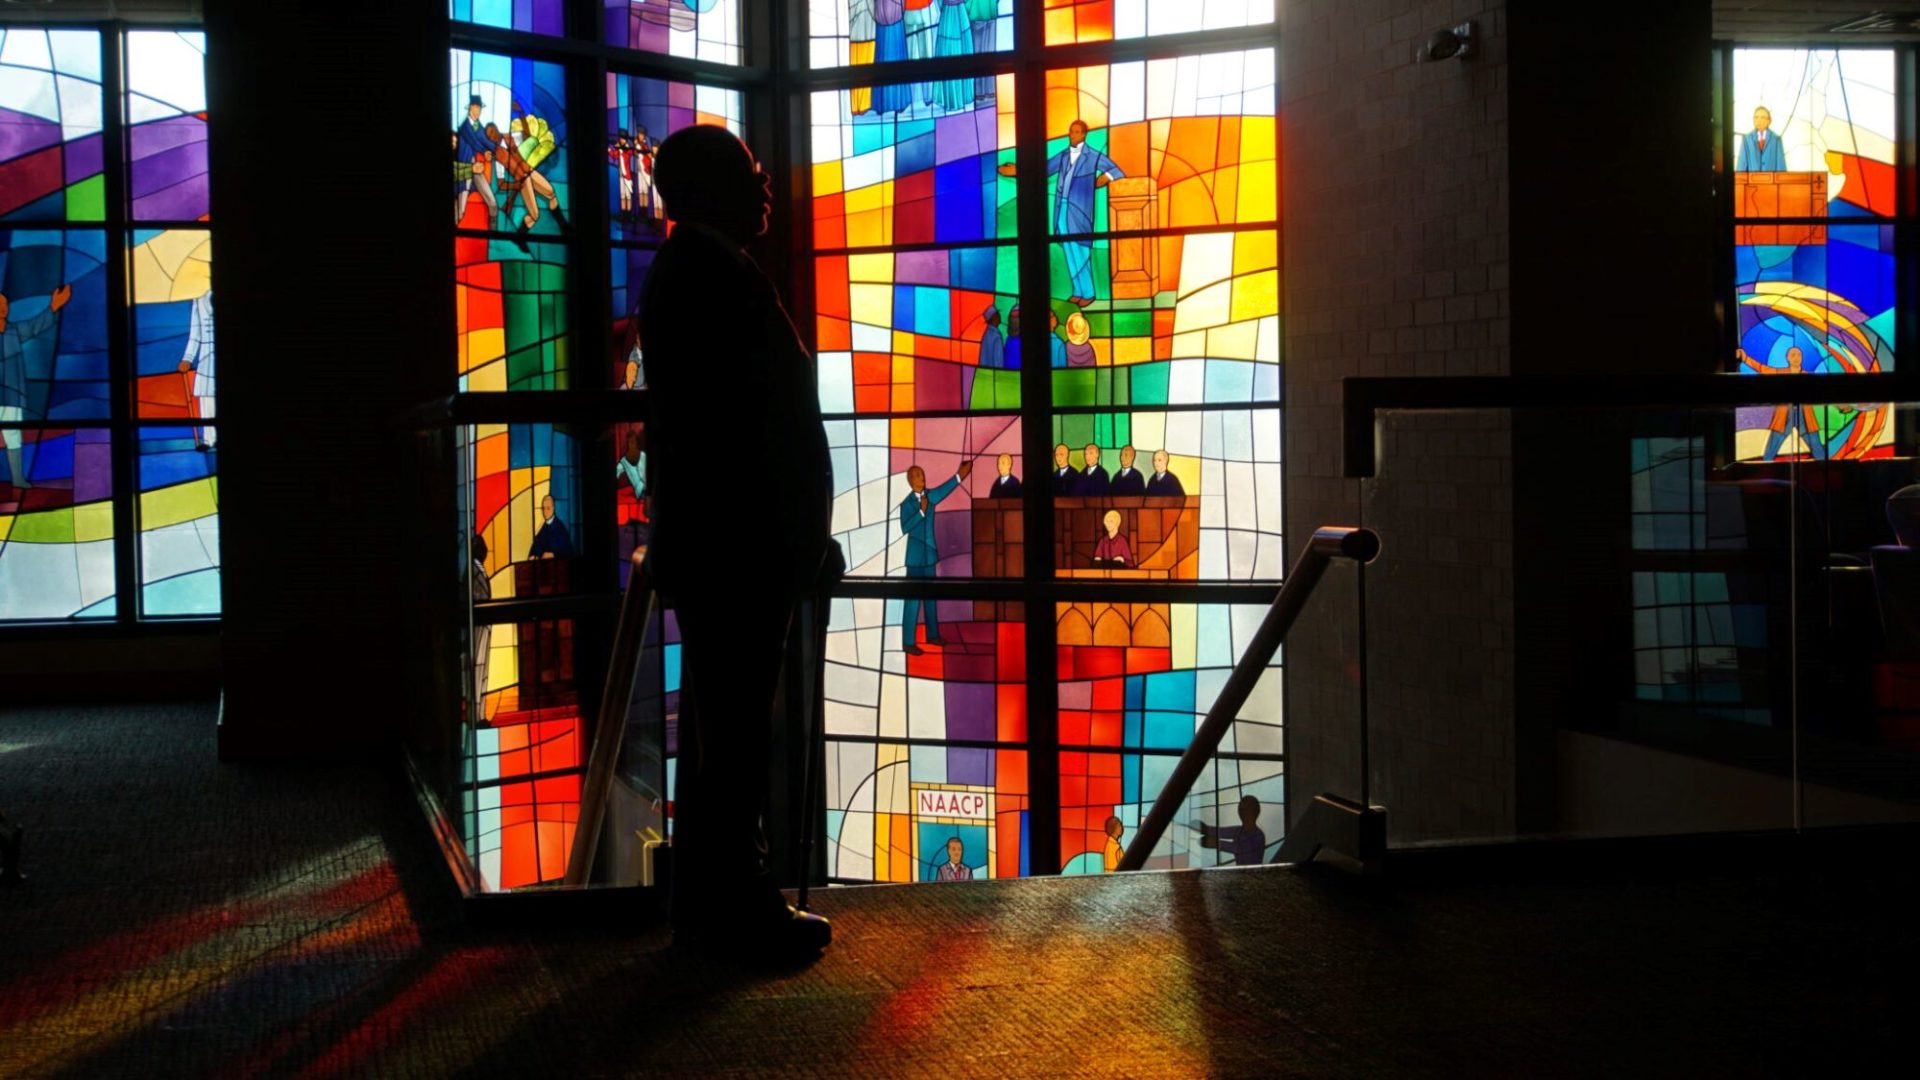 A silhouette of a man standing in front of colorful stained glass windows.